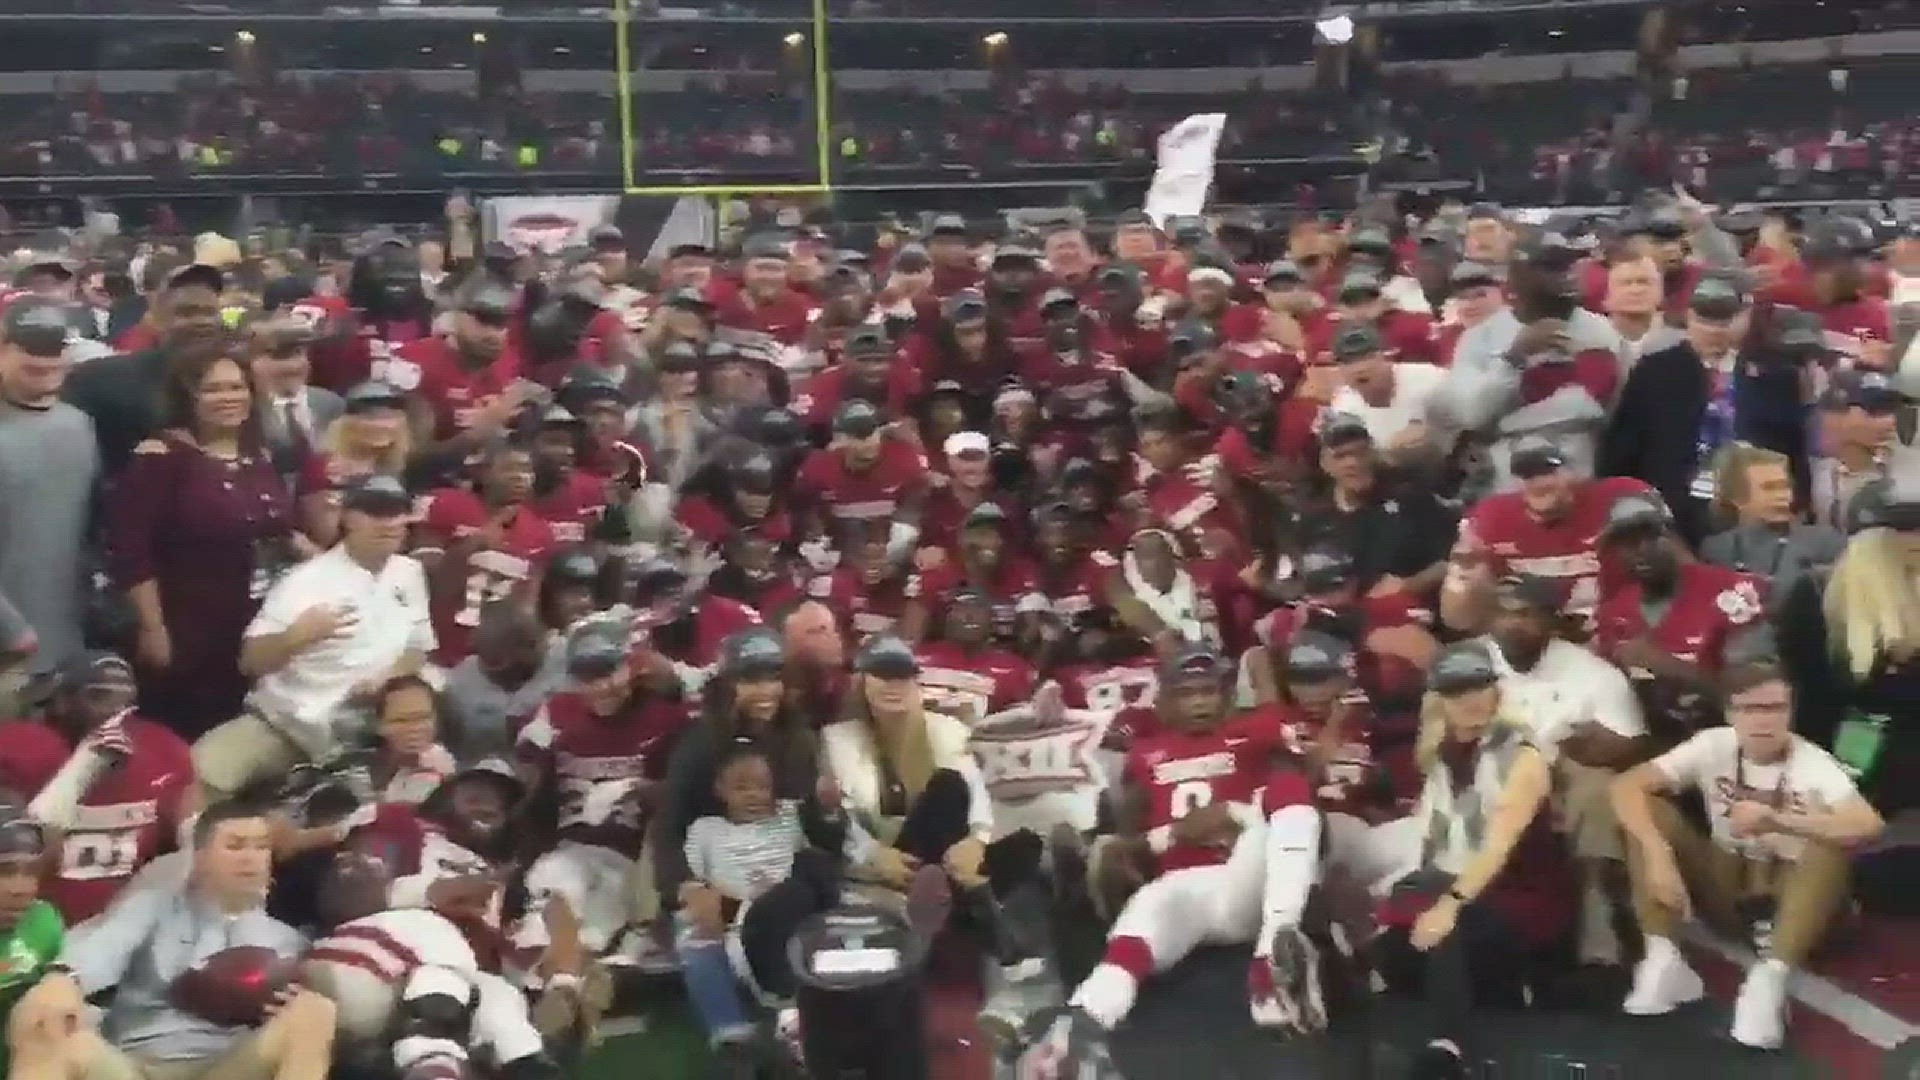 Sights and sounds at field-level after Oklahoma won the Big 12 Championship game at AT&T Stadium Saturday. WFAA.com